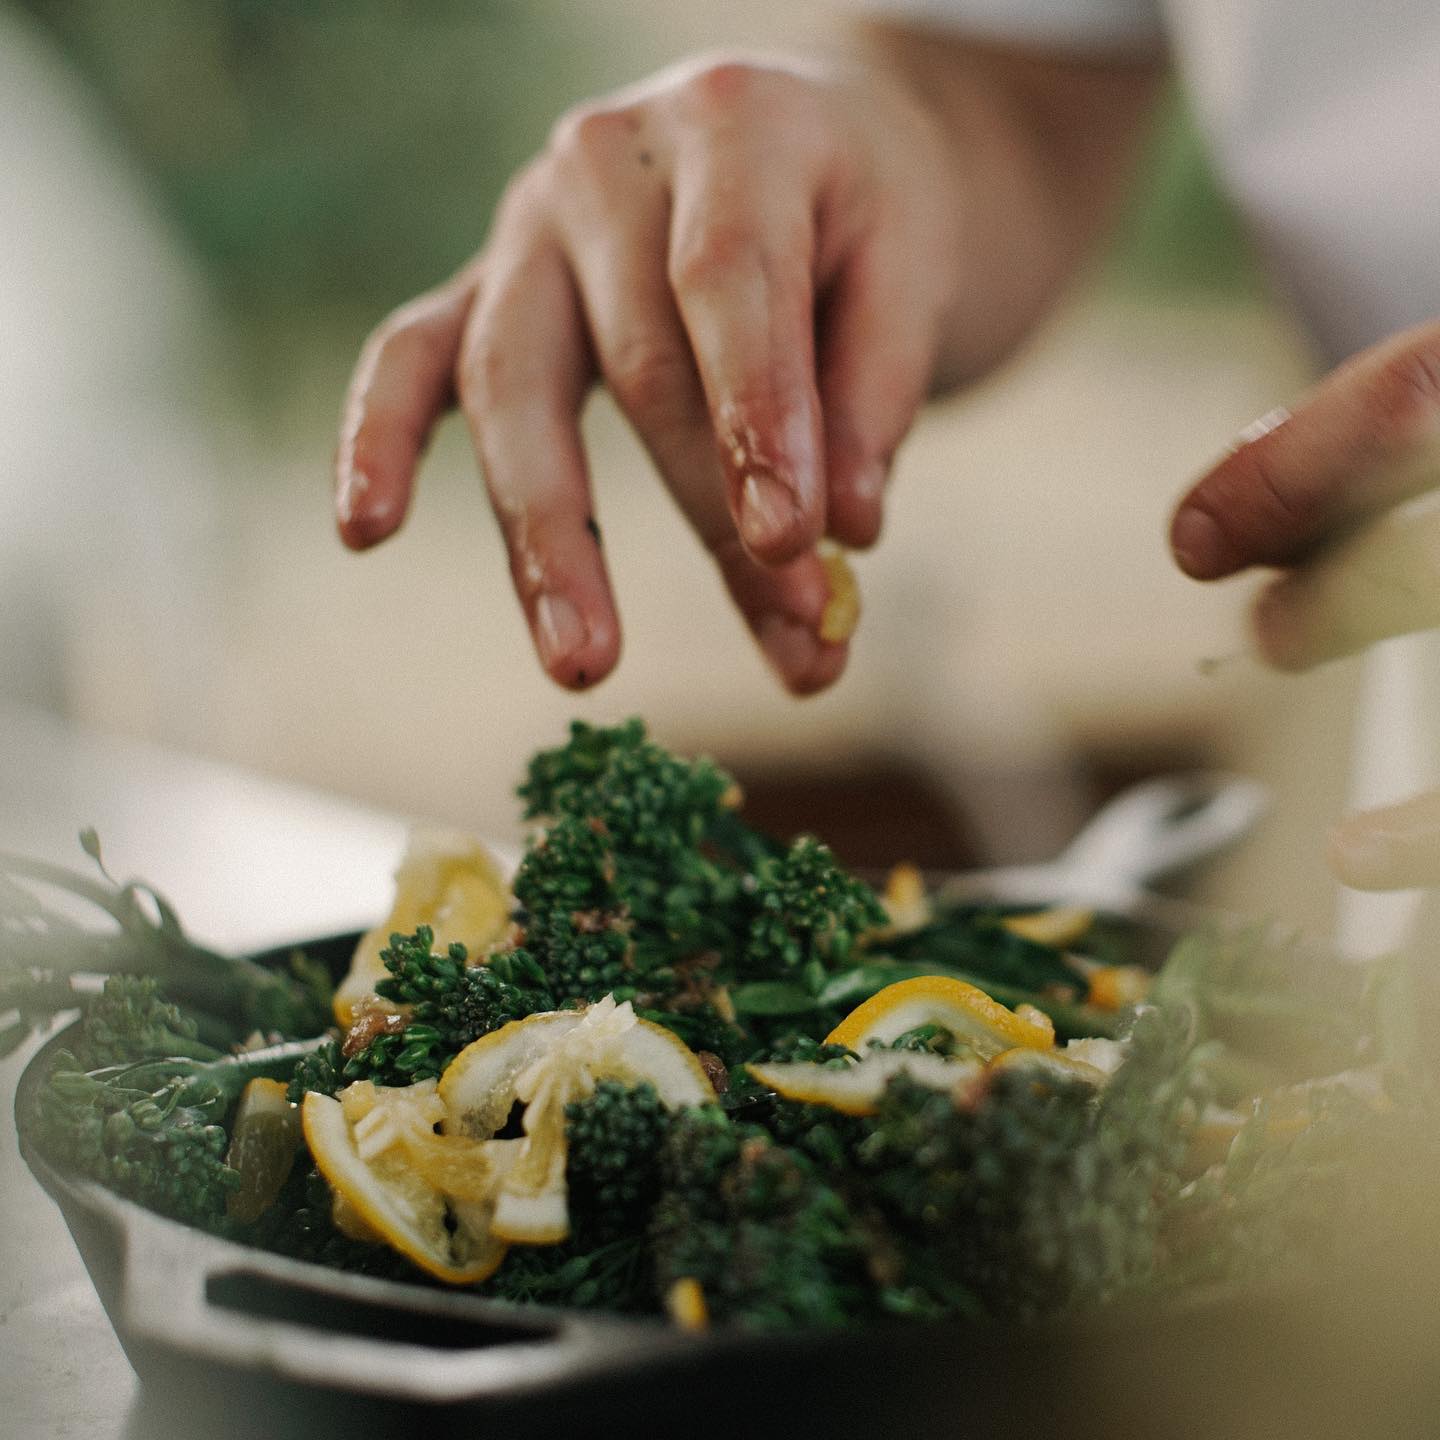 A chef cooking with fresh vegetables